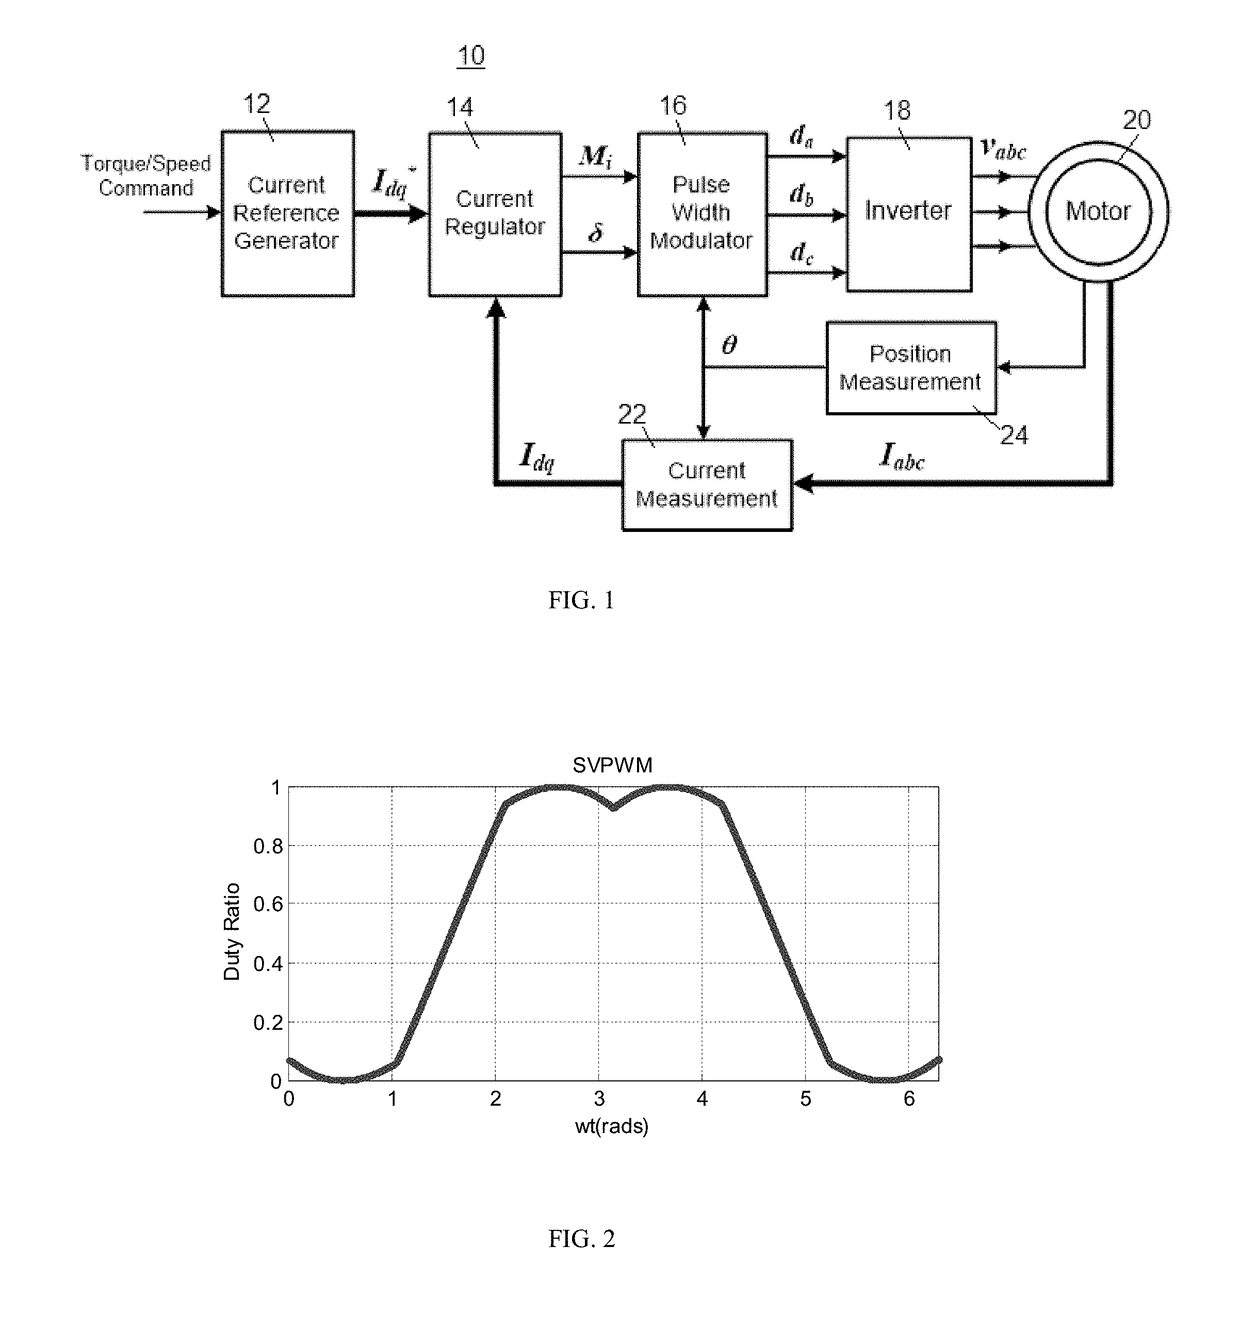 Adaptive pulse width modulation in motor control systems